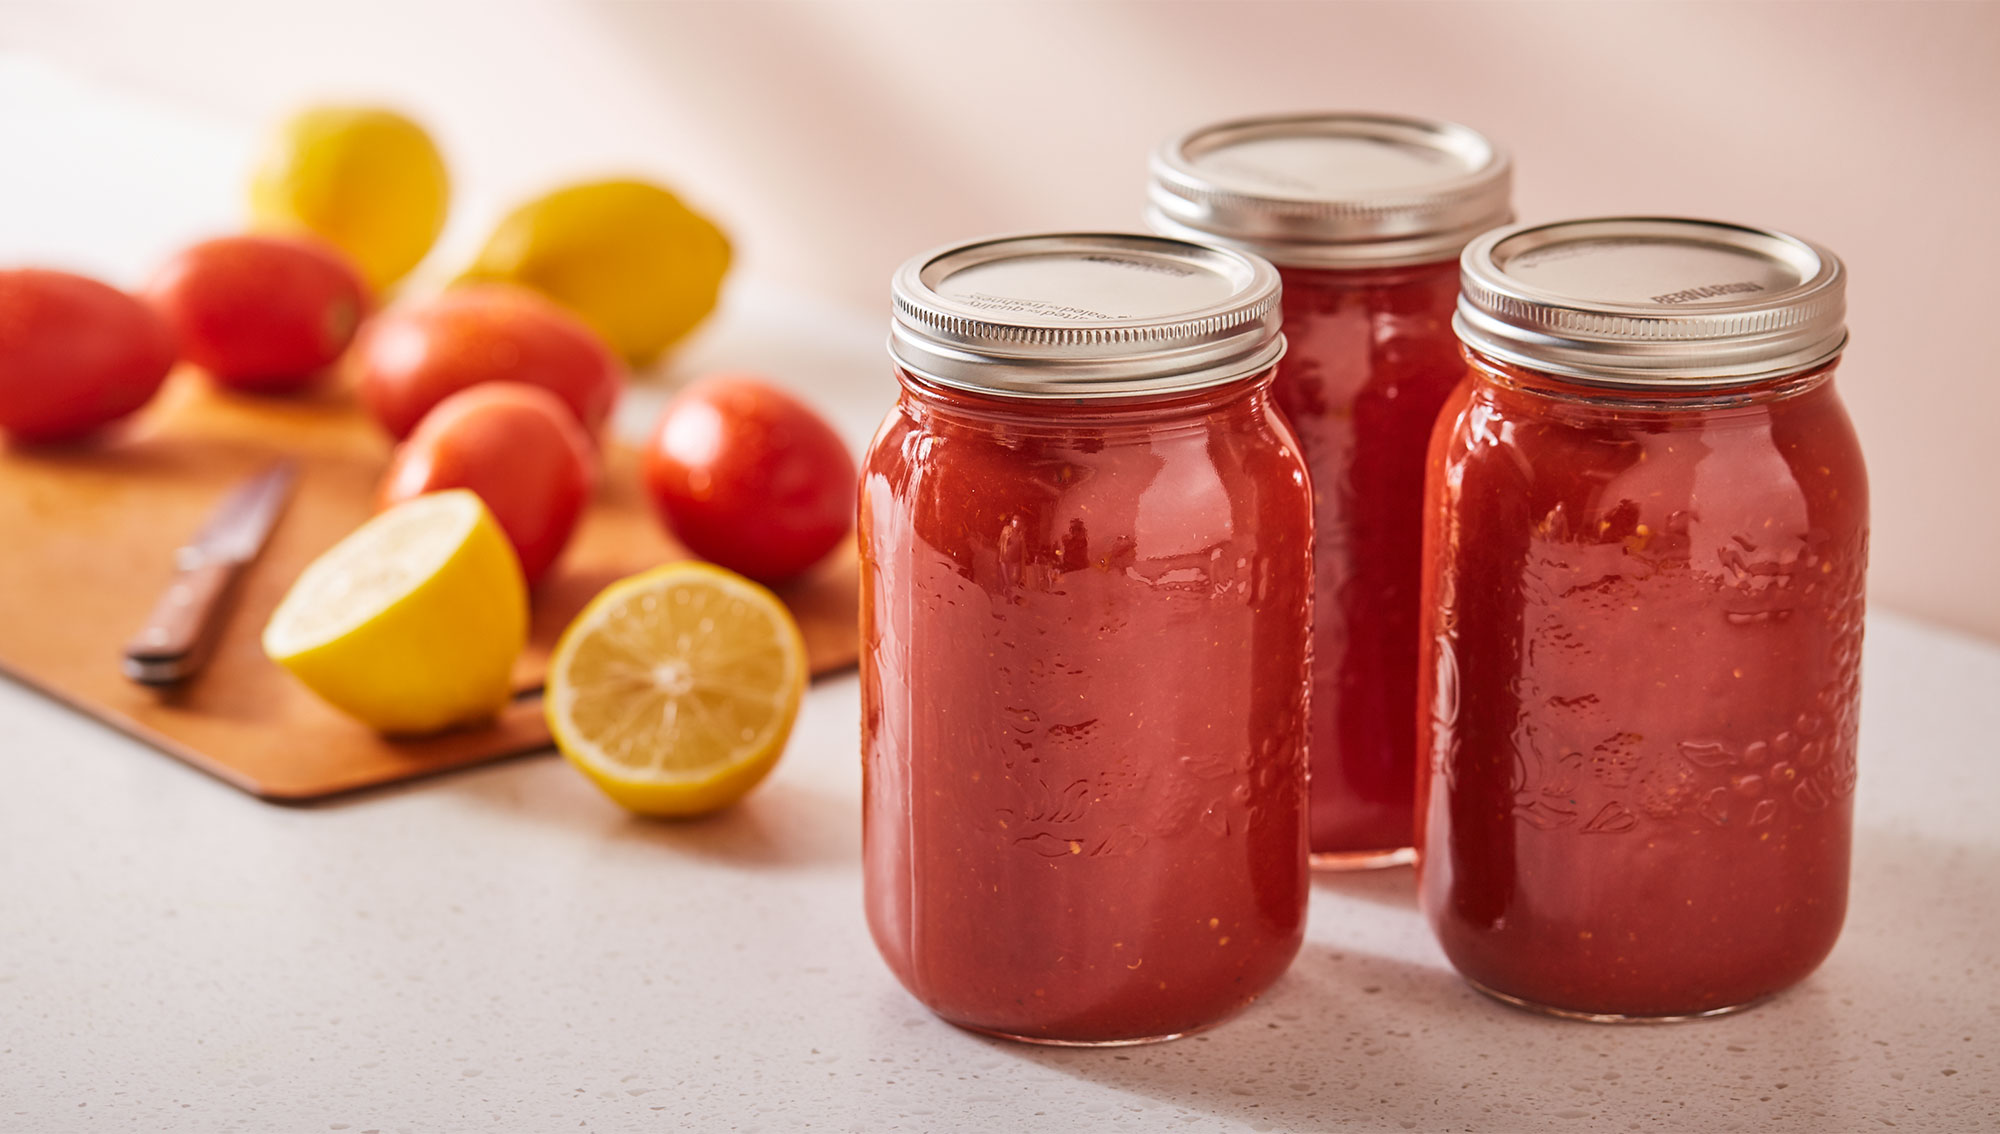 Jars of tomato preserves with whole tomatoes and lemons.